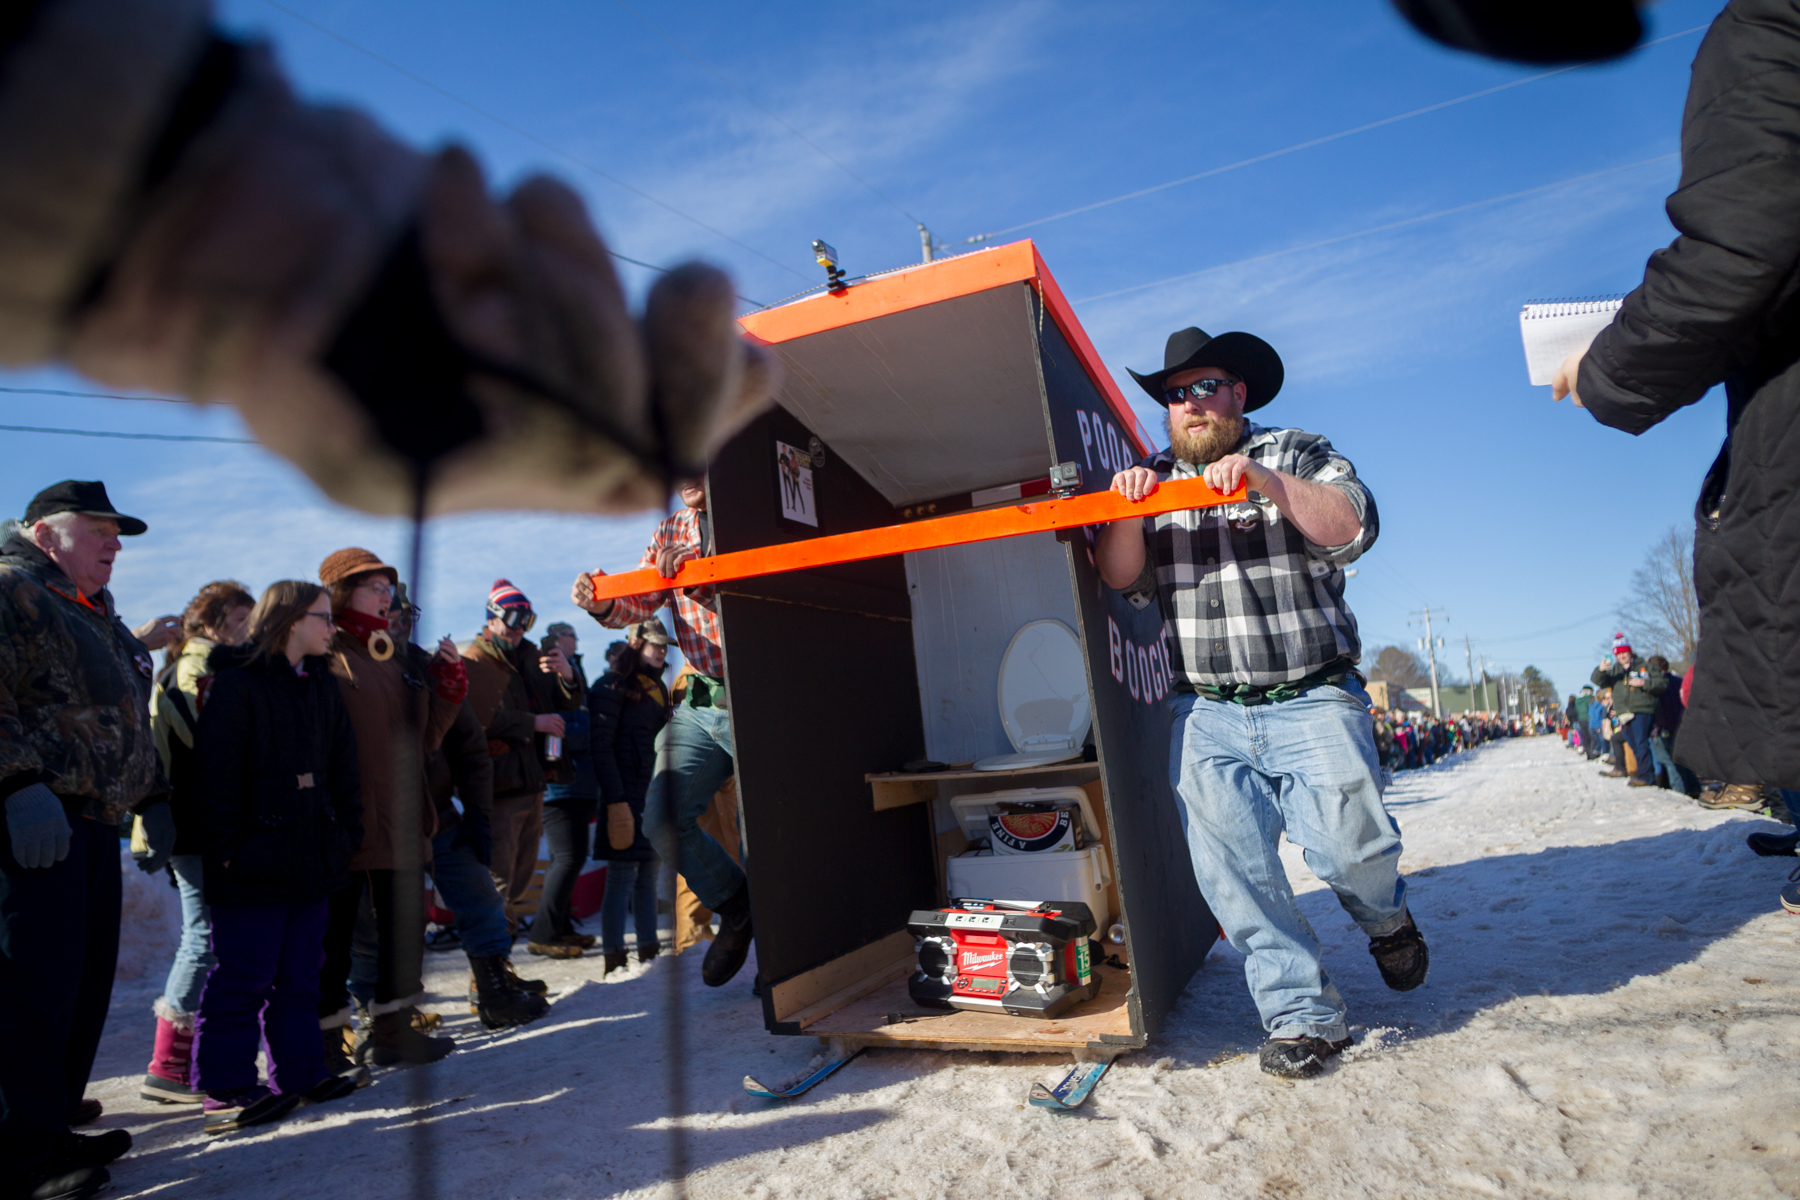 The Trenary Outhouse Races